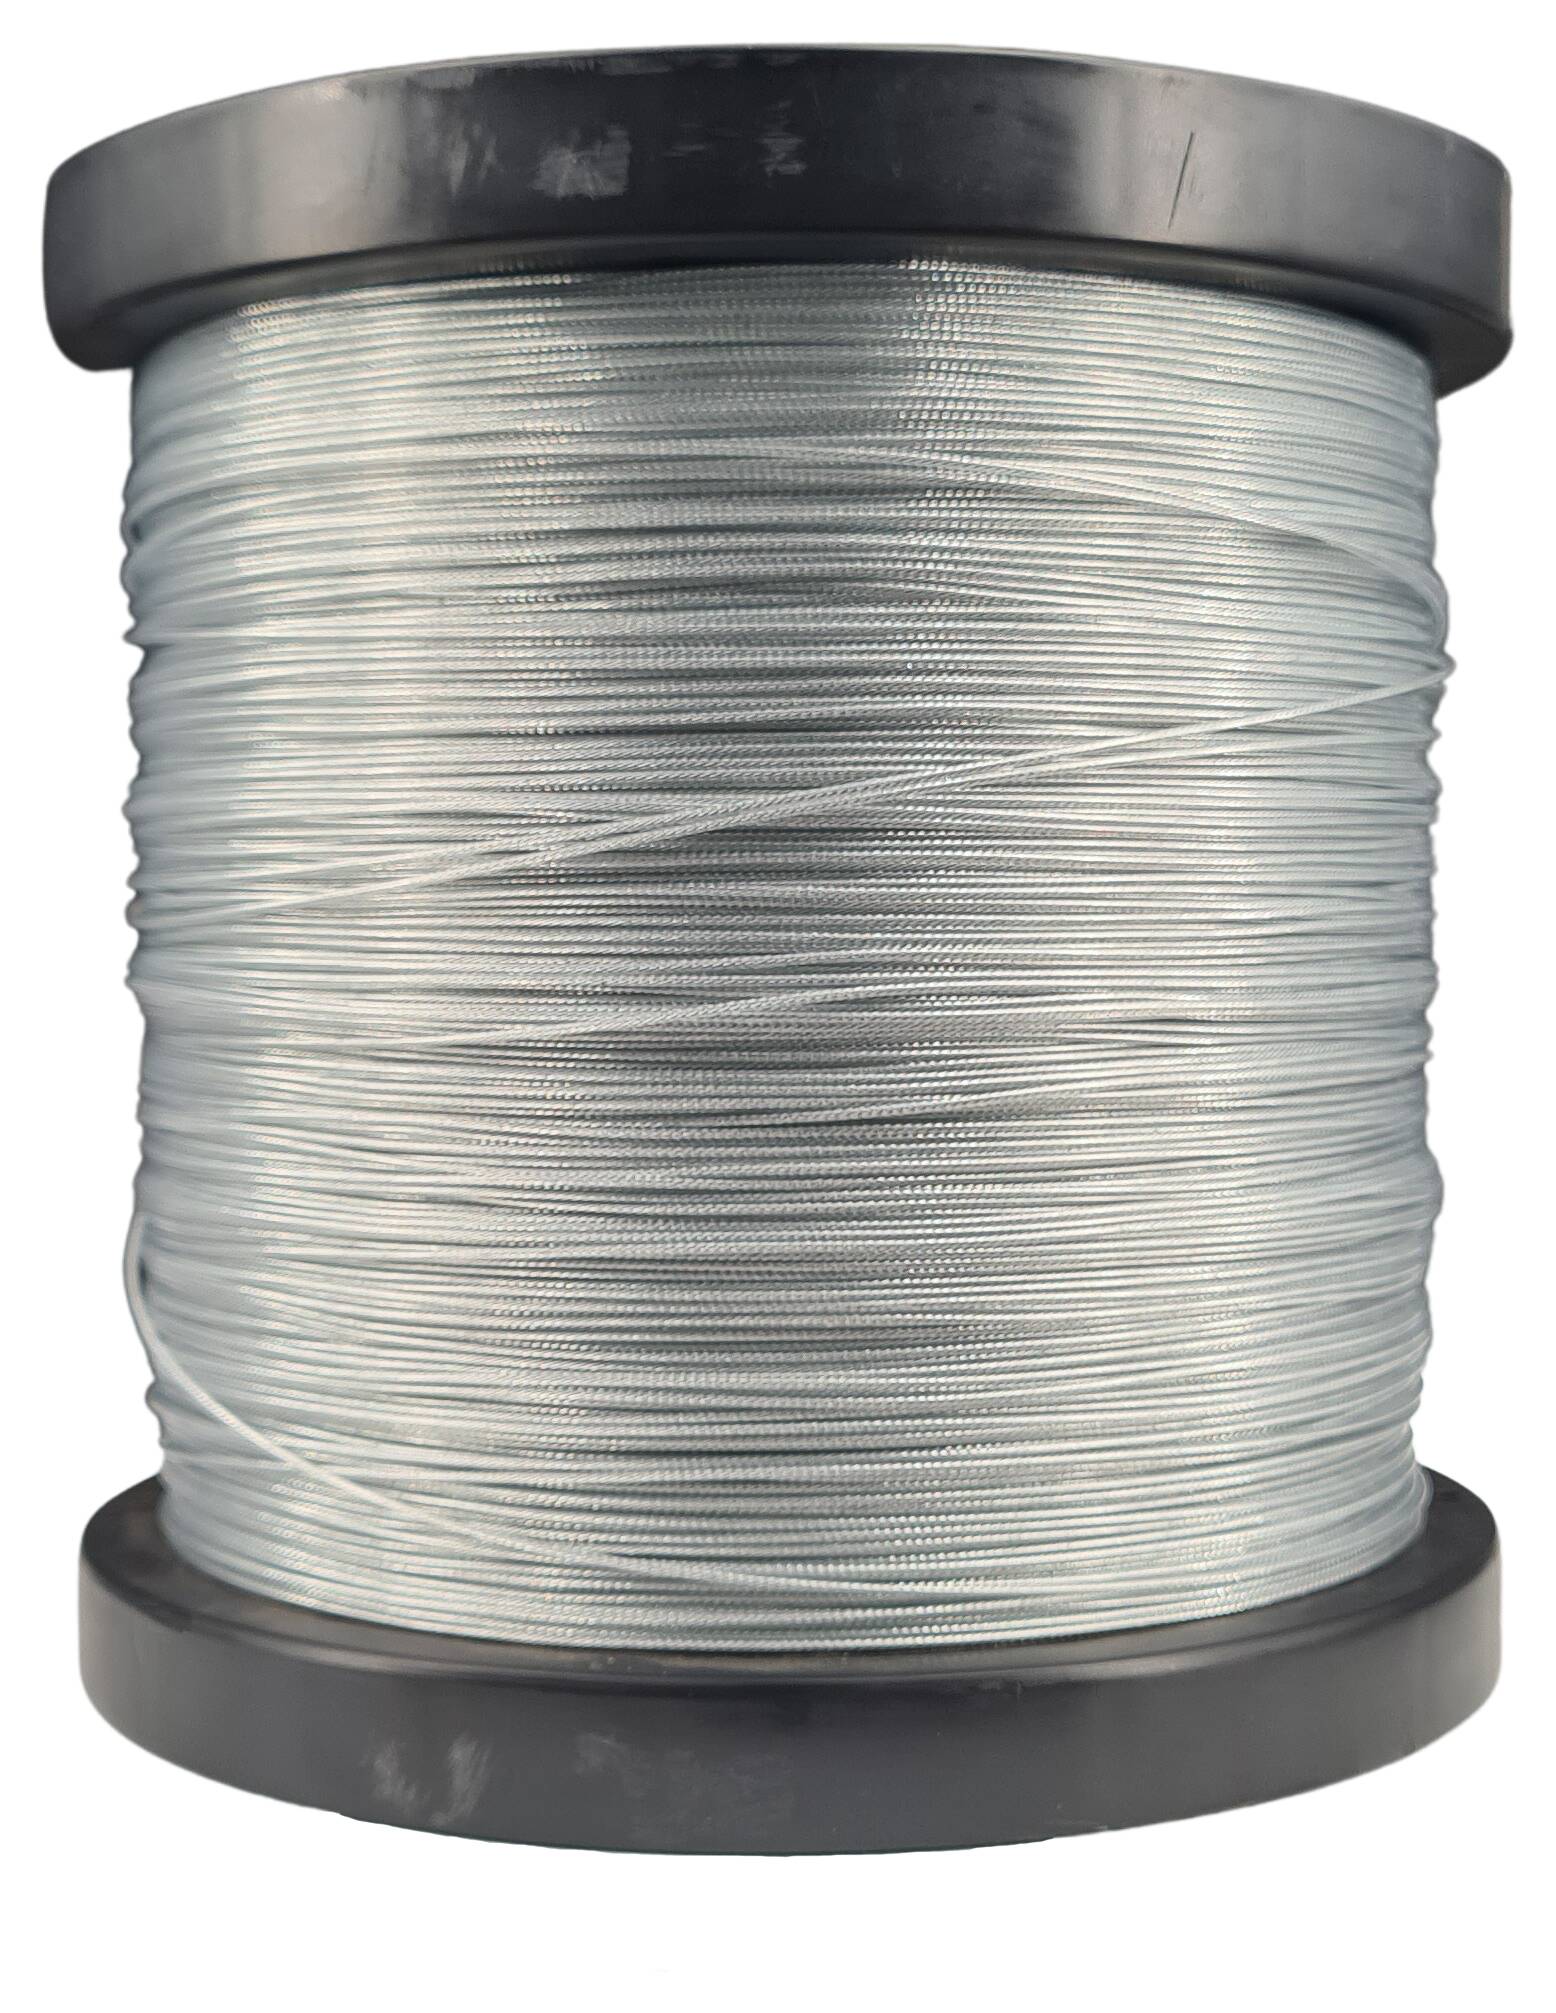 steel wire Ø 0,6 (1x7 zn) coated with PVC-jacket 1,0mm 1.000 mtr. coil